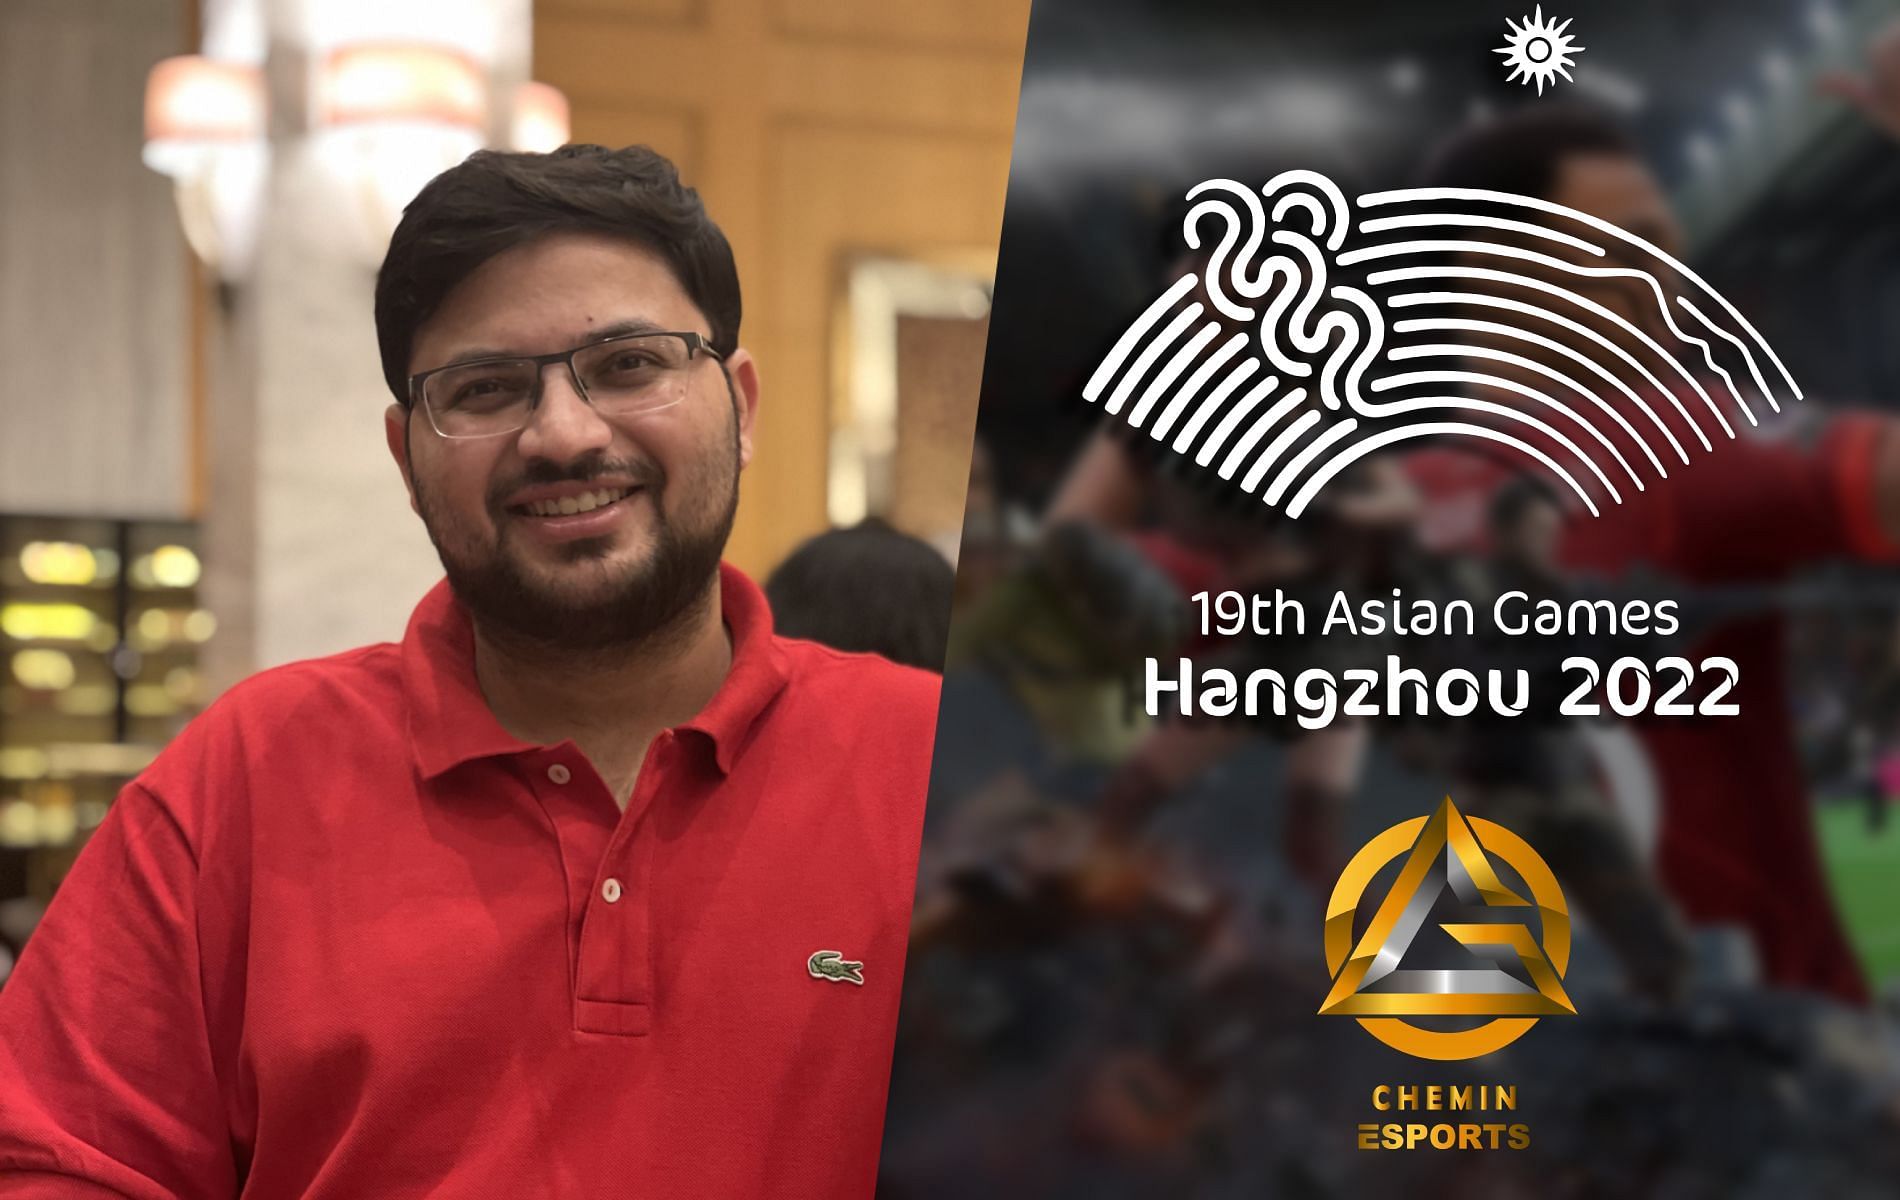 Ishan Verma, Founder and Director of Chemin Esports on the 2022 Asian Games (Image via Sportskeeda)